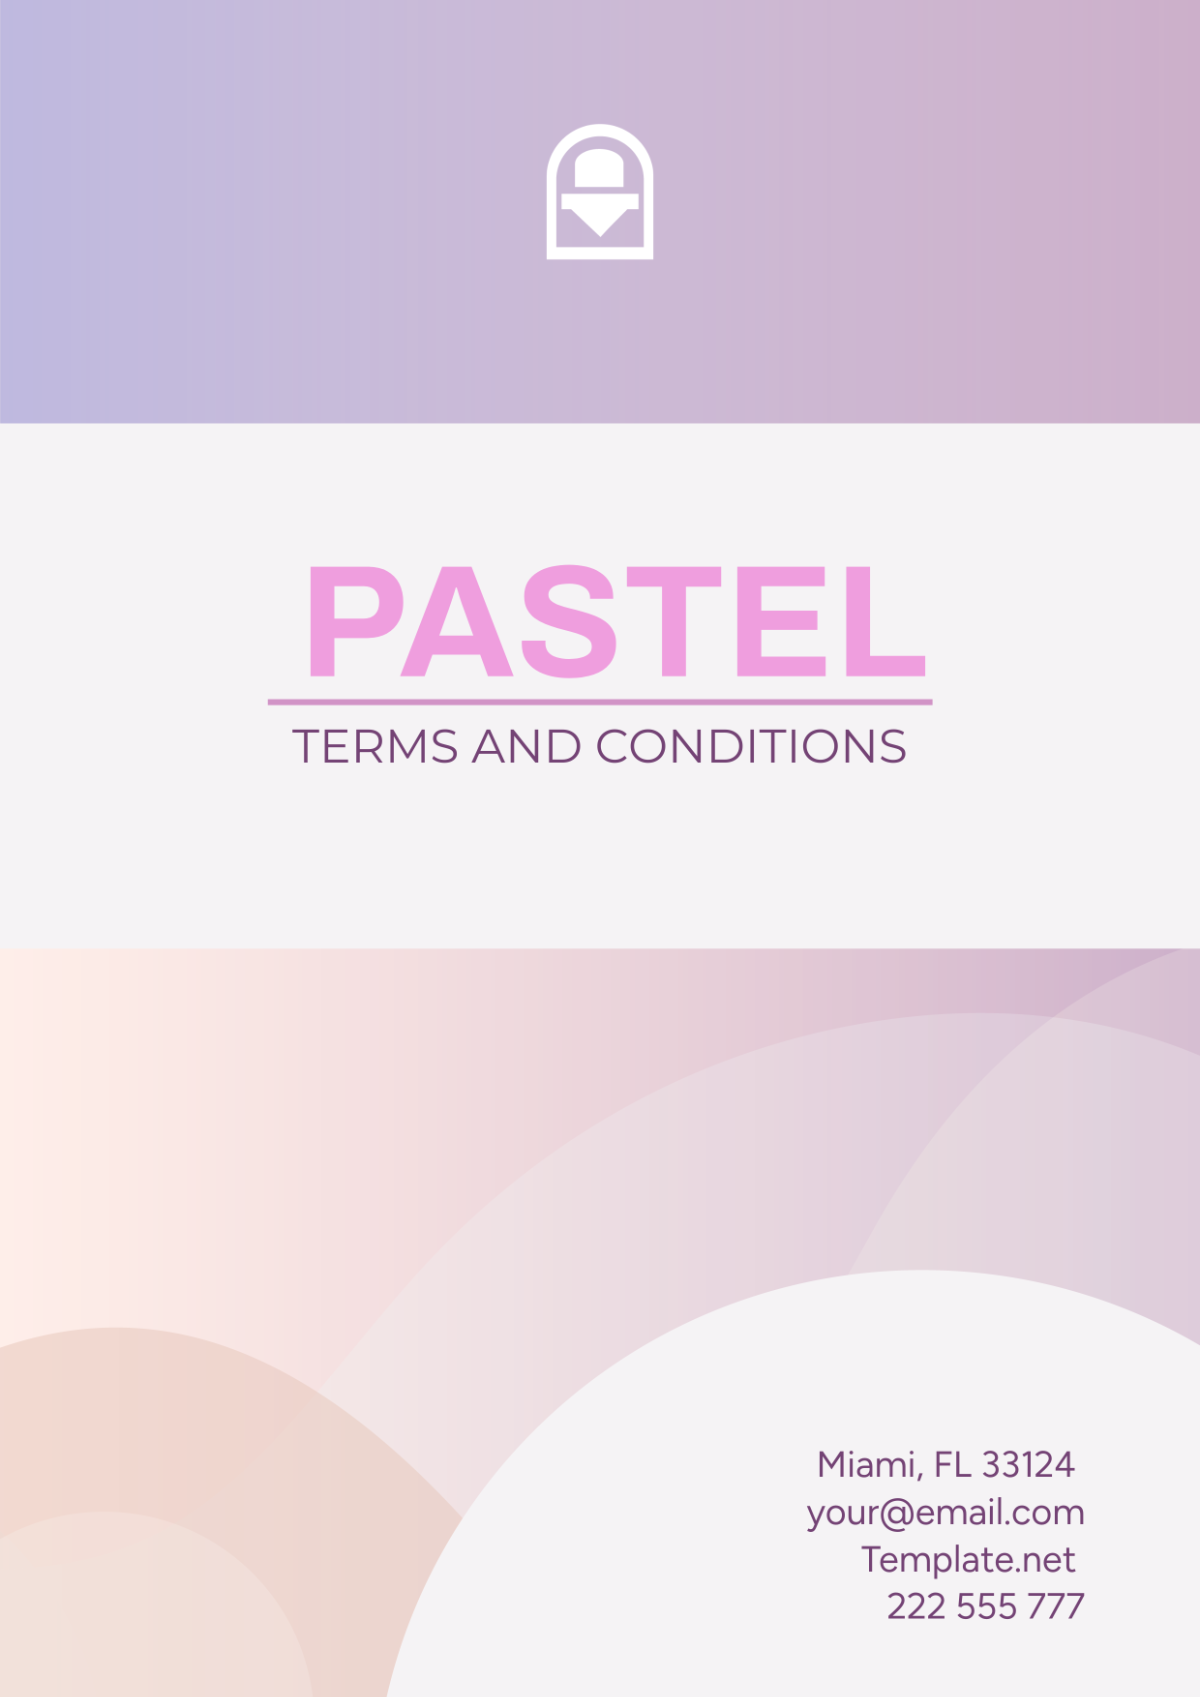 Pastel Terms and Conditions Cover Page Template